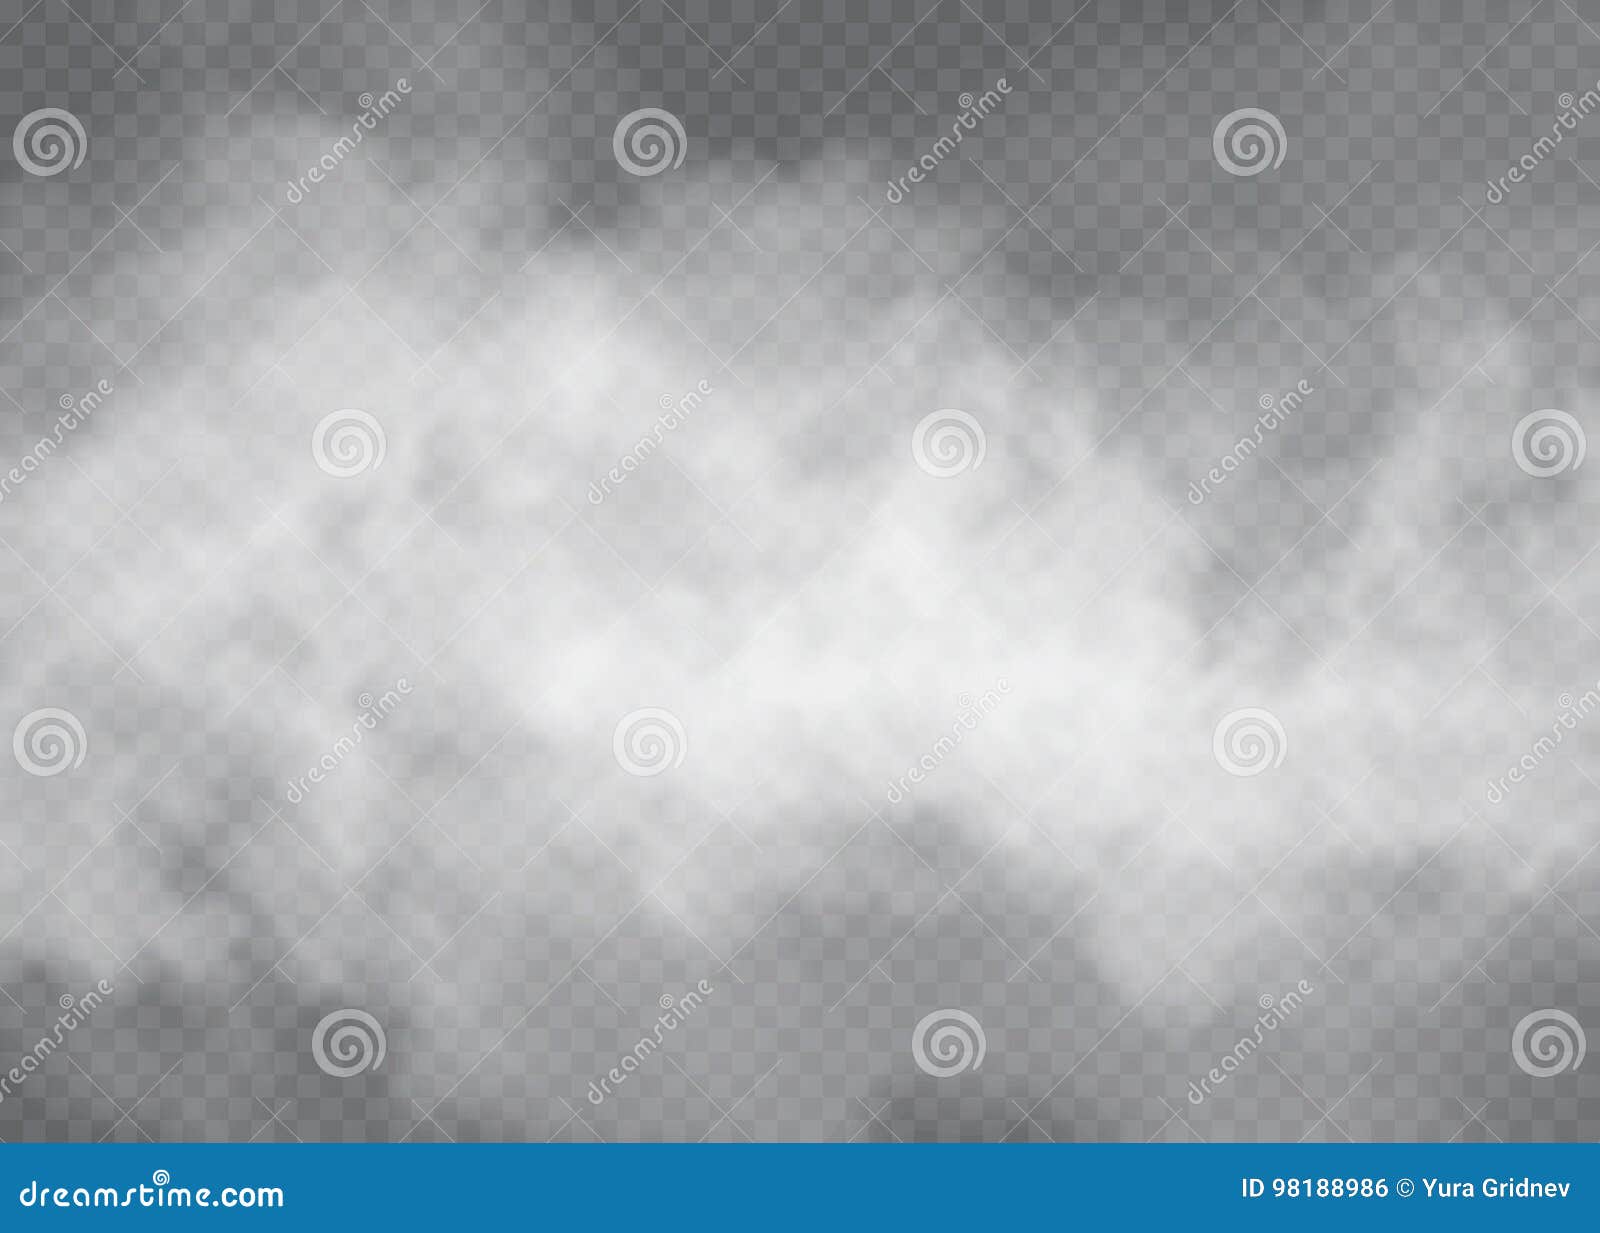 fog or smoke transparent special effect. white cloudiness, mist or smog background.  